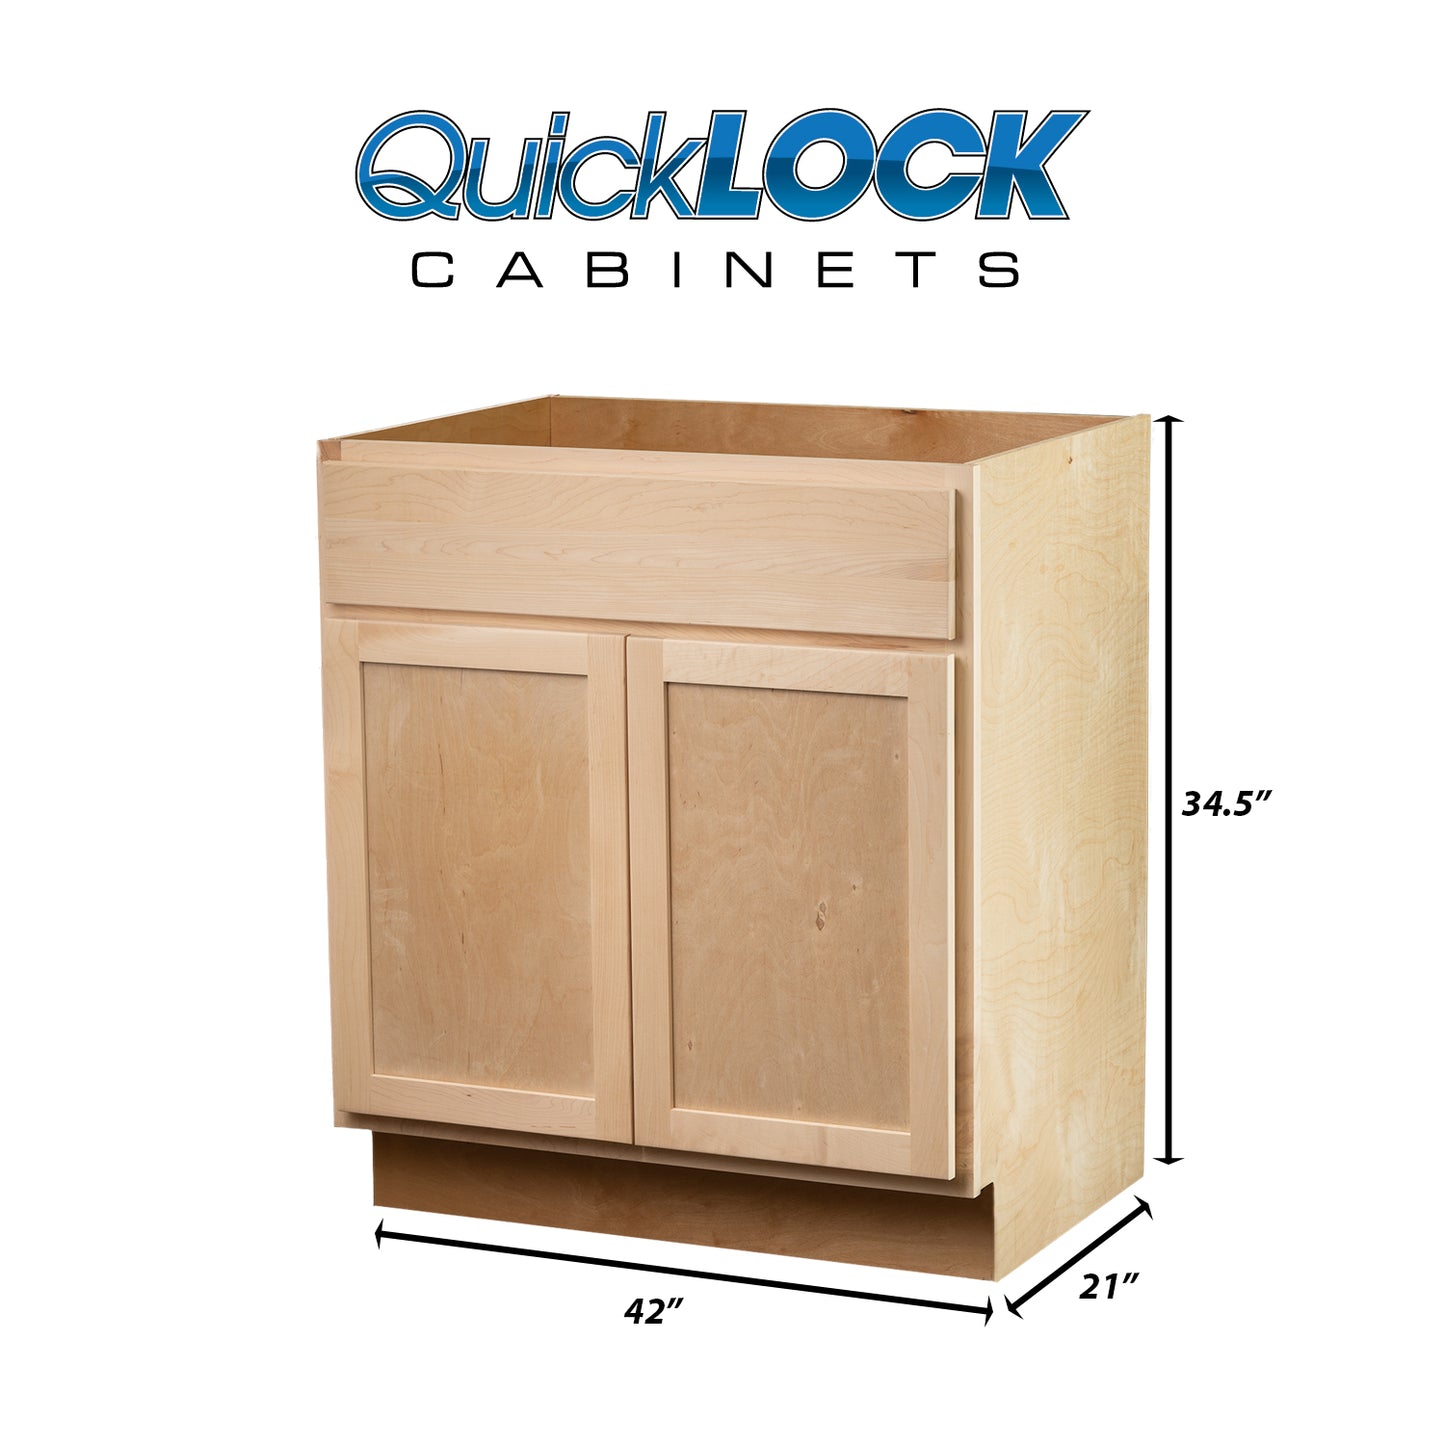 Quicklock RTA (Ready-to-Assemble) Raw Maple Vanity Base Cabinet | 42"Wx34.5"Hx21"D